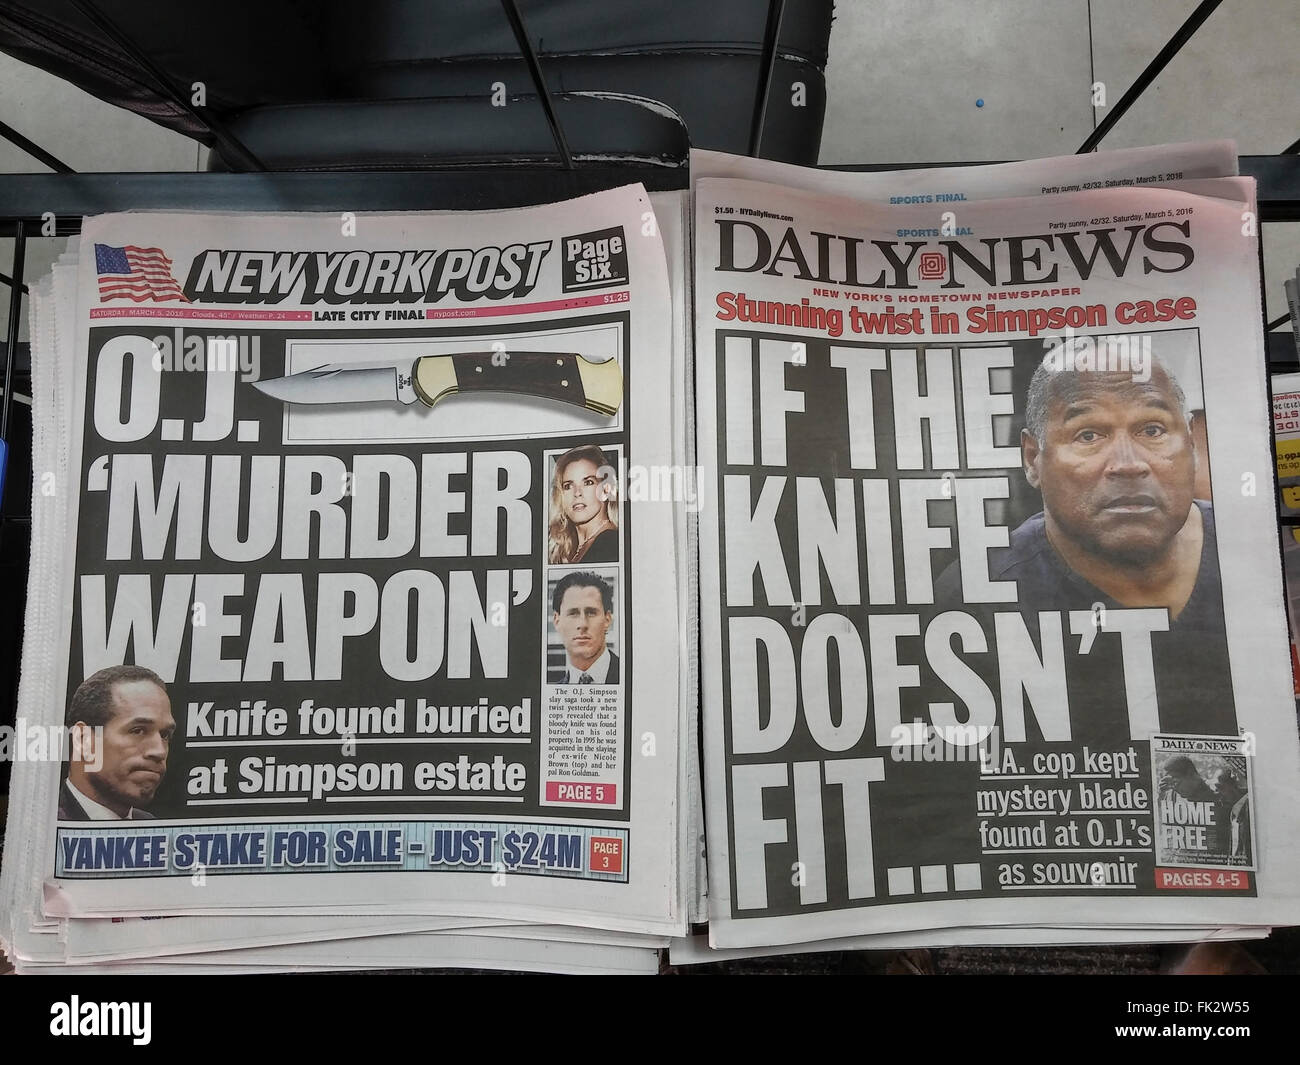 The New York Post and Daily News report on Saturday, March 5, 2016 about the knife found on O.J.Simpson's estate which ended up not being the knife involved in the Nicole Brown Simpson, Ron Goldman murders. (© Richard B. Levine) Stock Photo